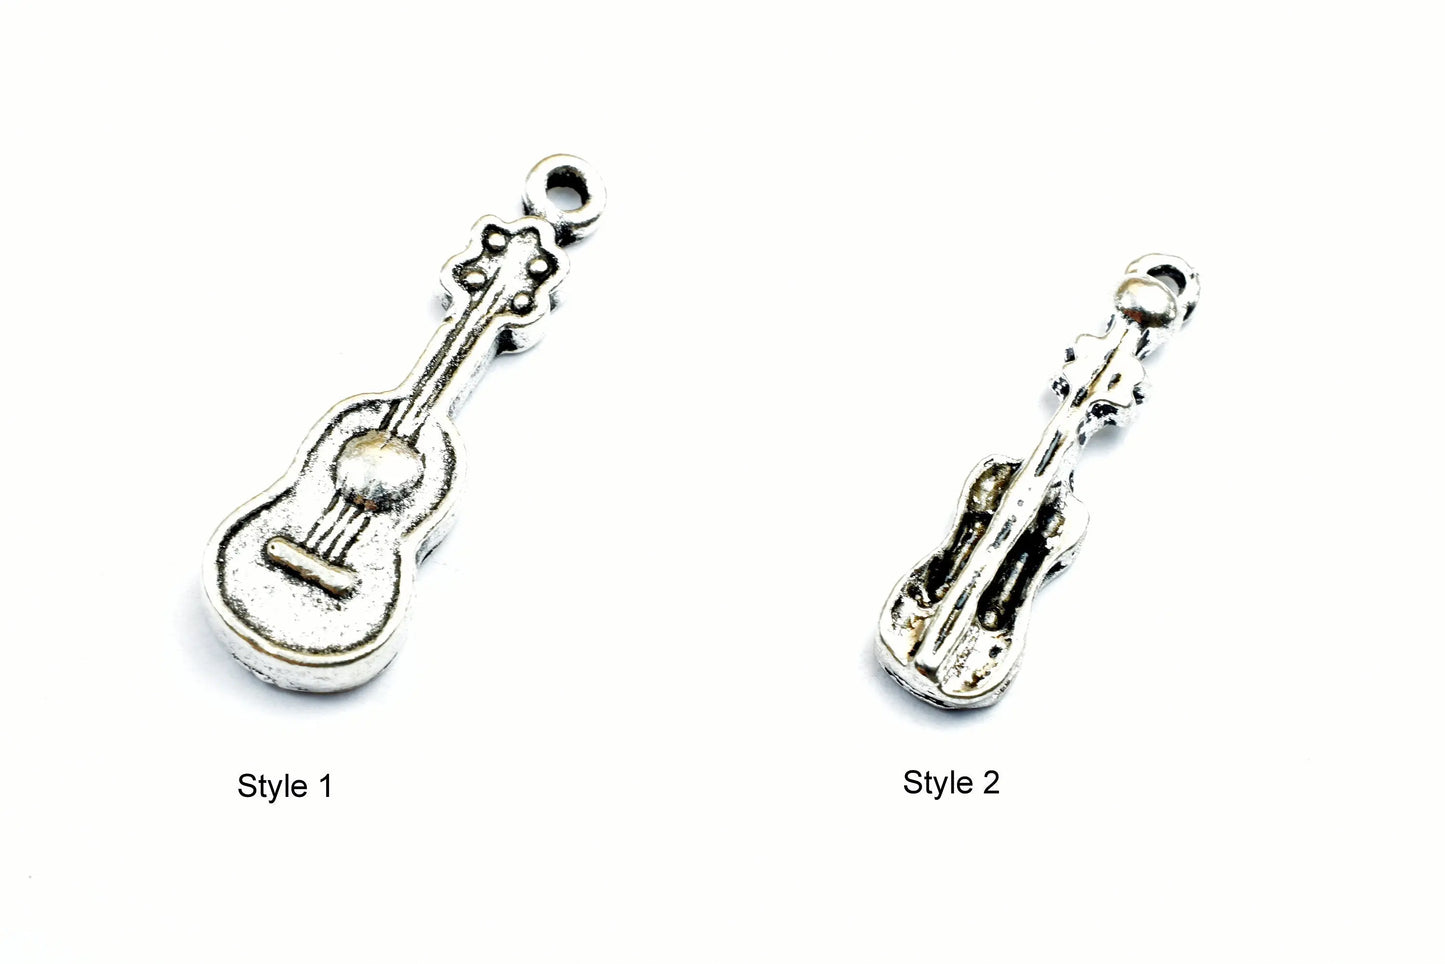 Violin or Guitar Charm Size 25x6.5mm, 29x10mm Antique Tibetan Silver Tone Musical Instruments Charm Pendant Finding For Jewelry Making - BeadsFindingDepot